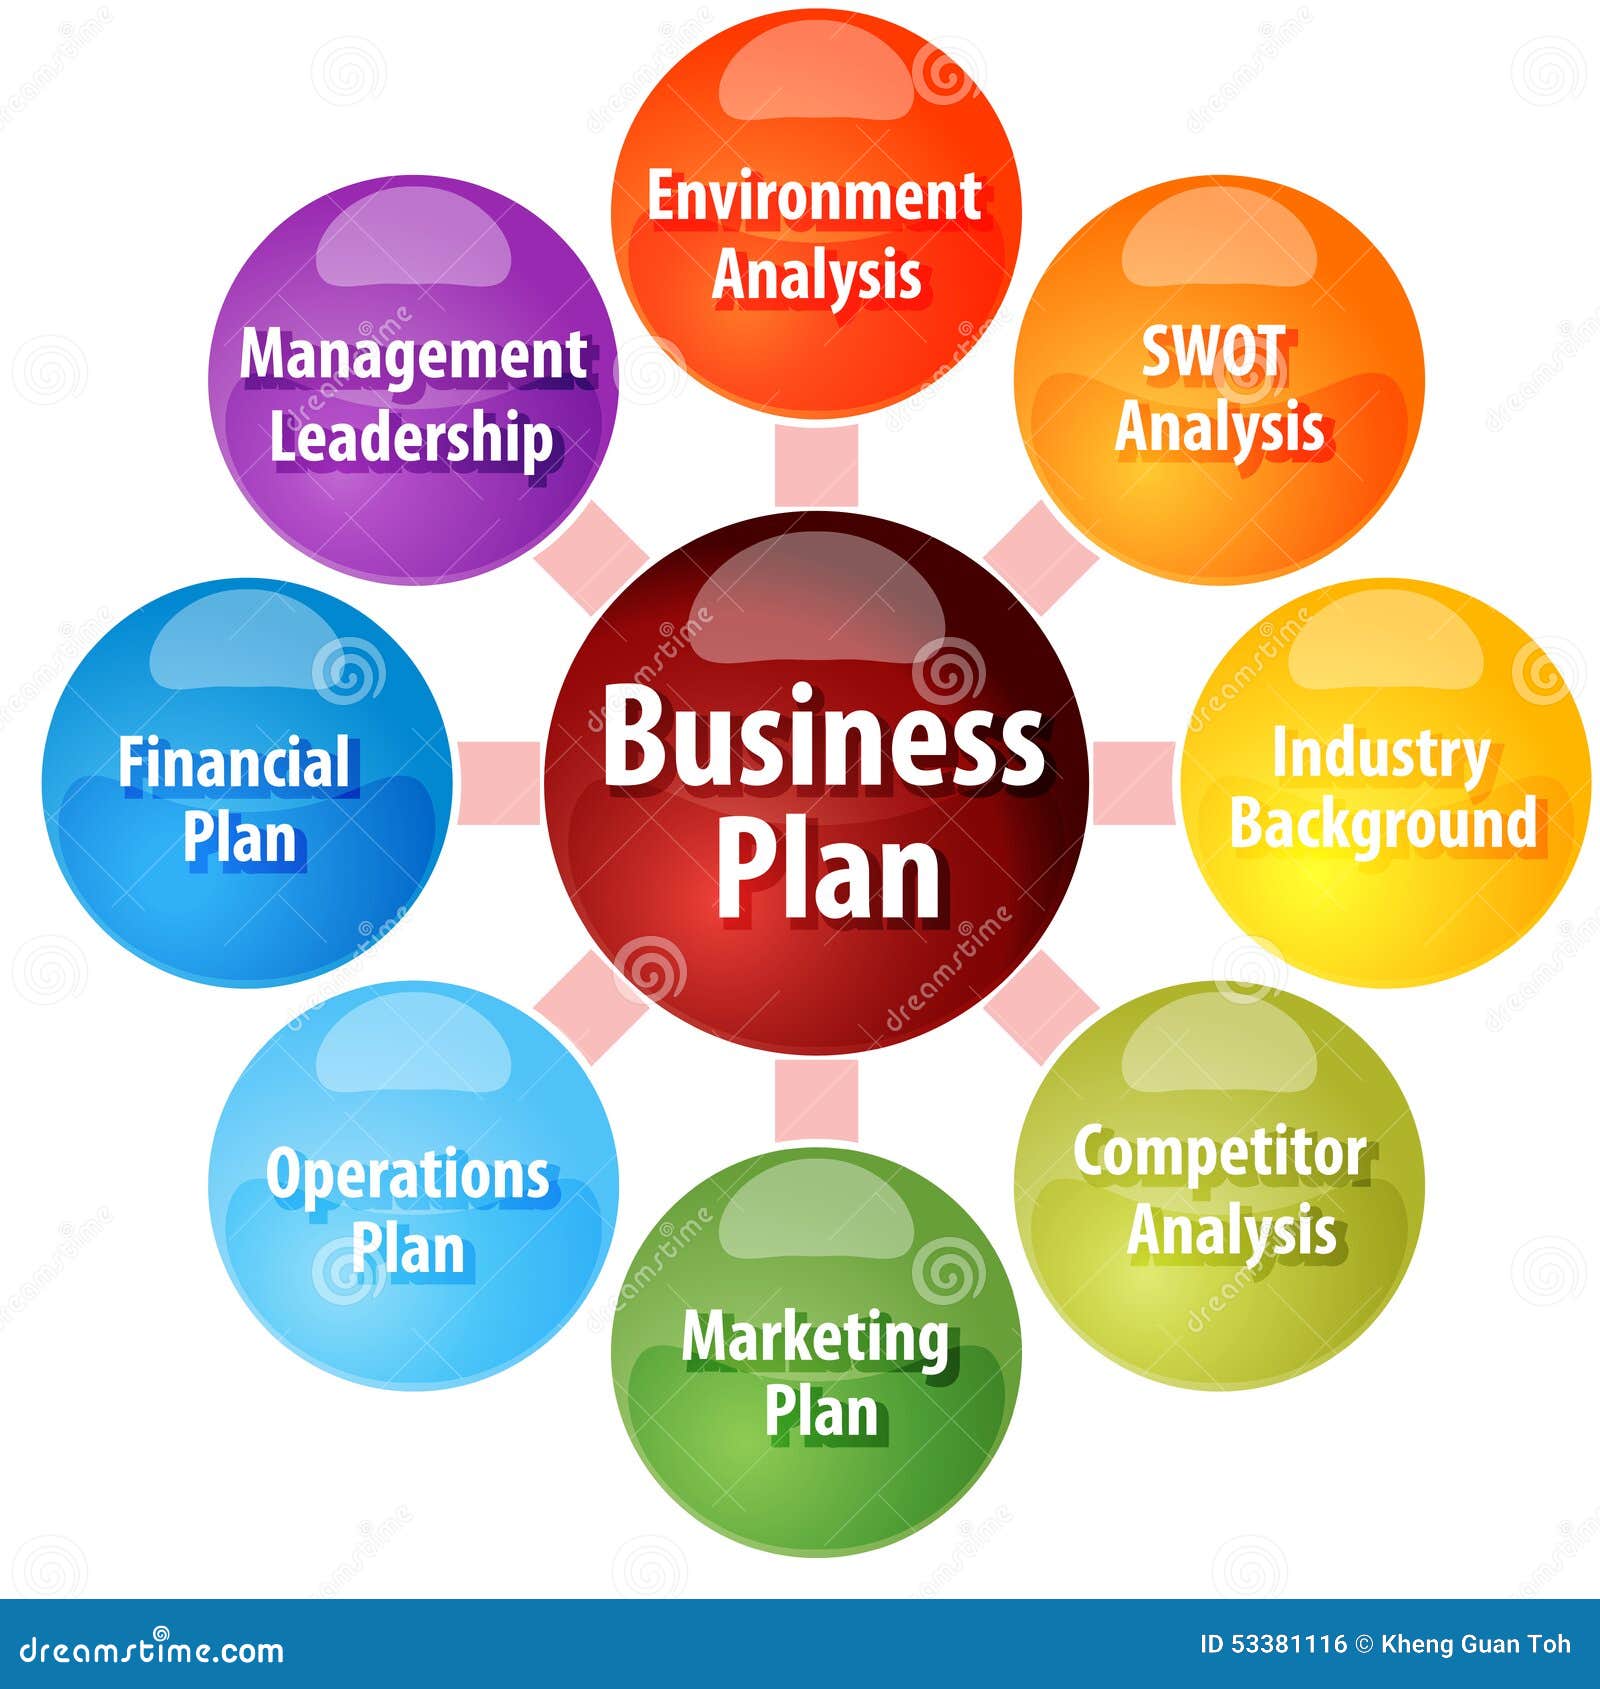 operations sections of the business plan